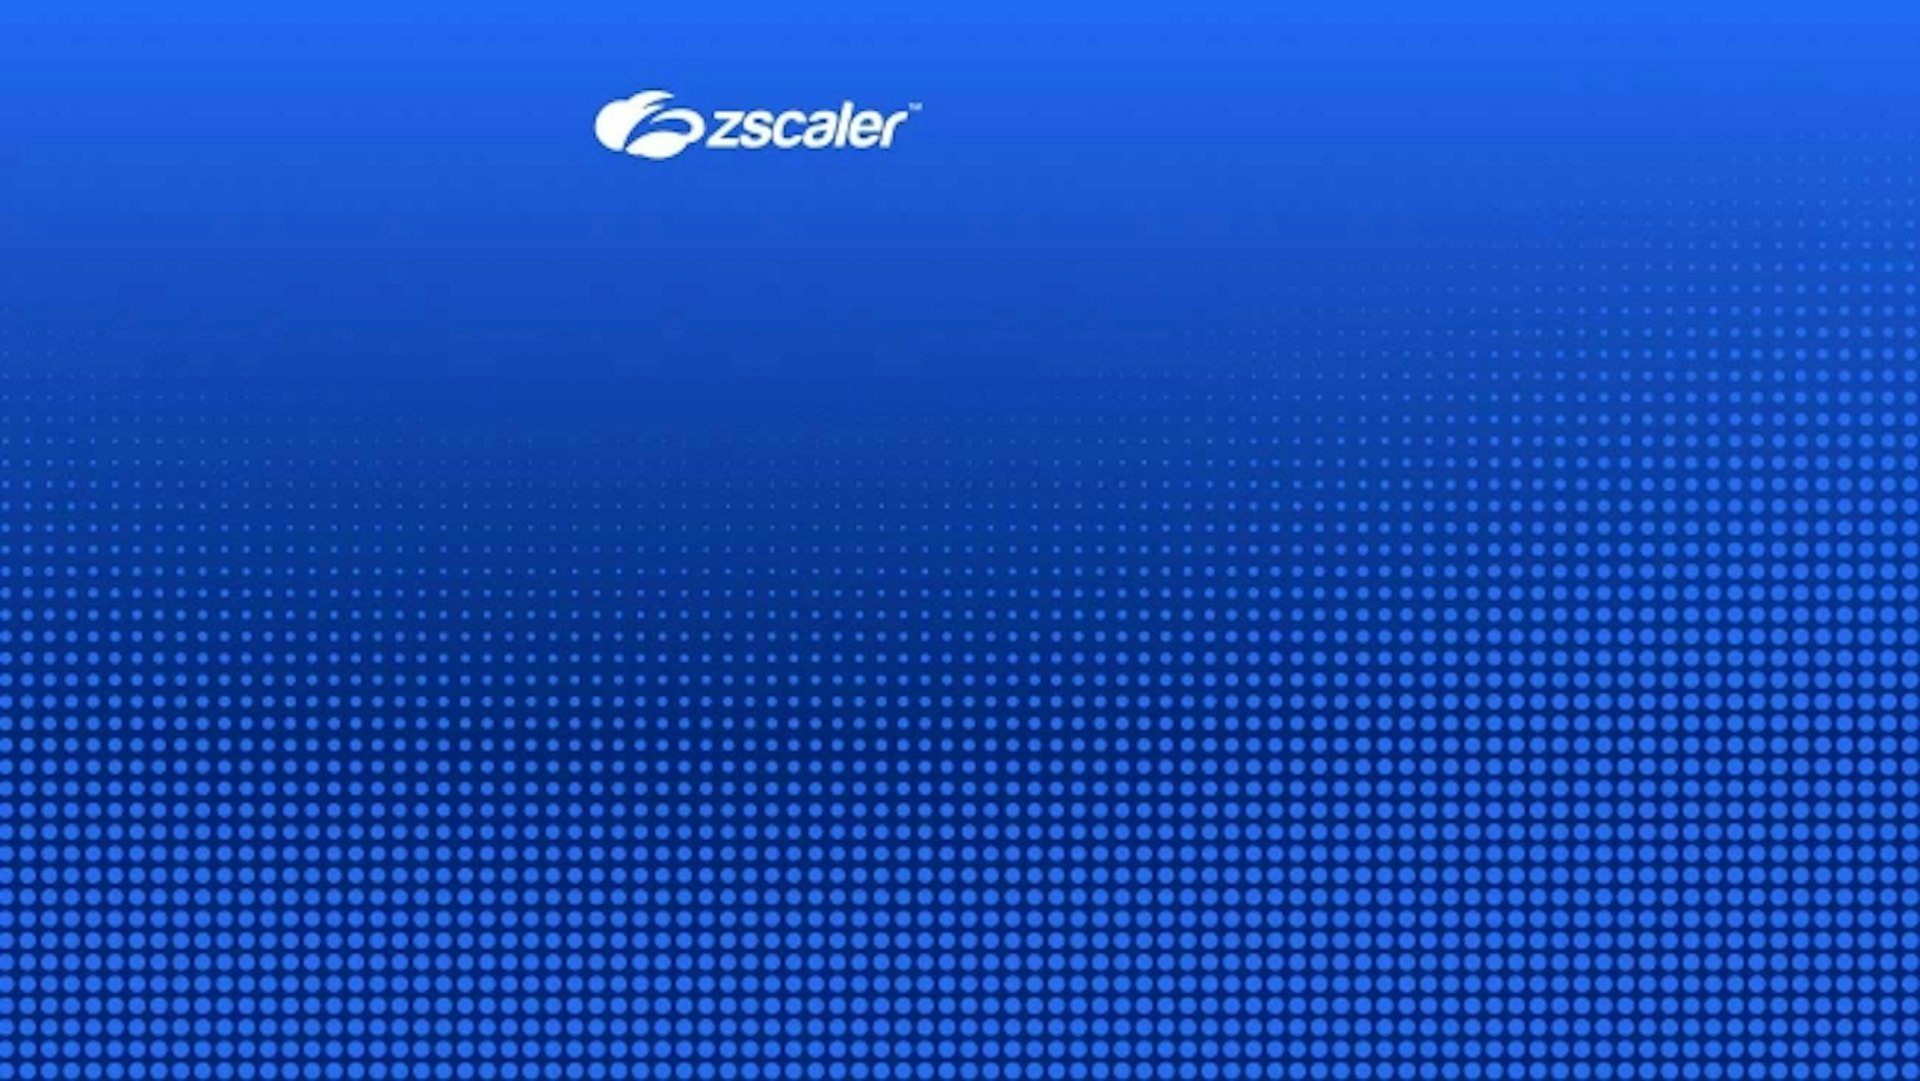 Deceiving Log4Shell with Zscaler